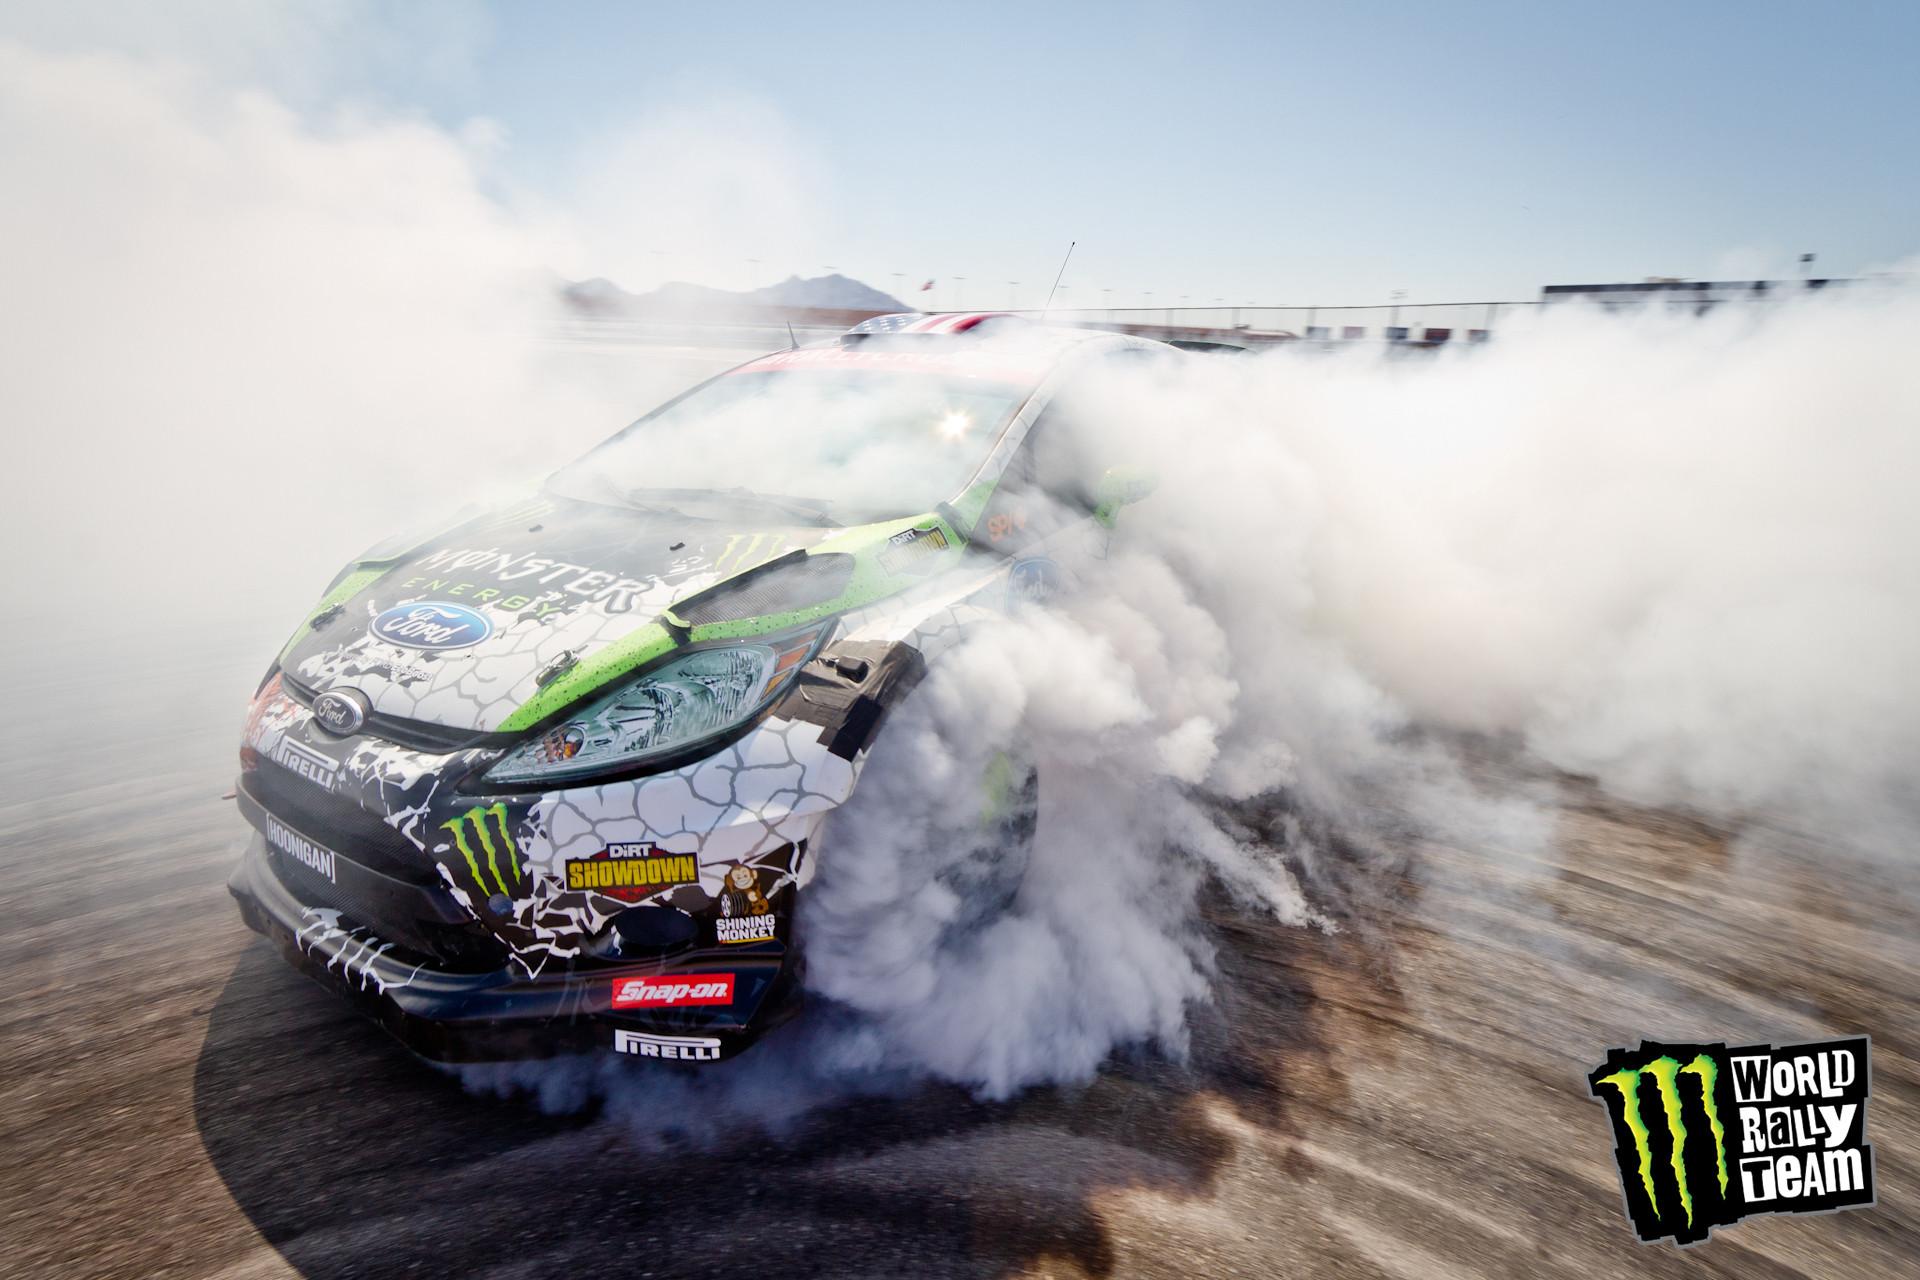 Ken Block drifting in his Ford Fiesta for his Las Vegas tire test